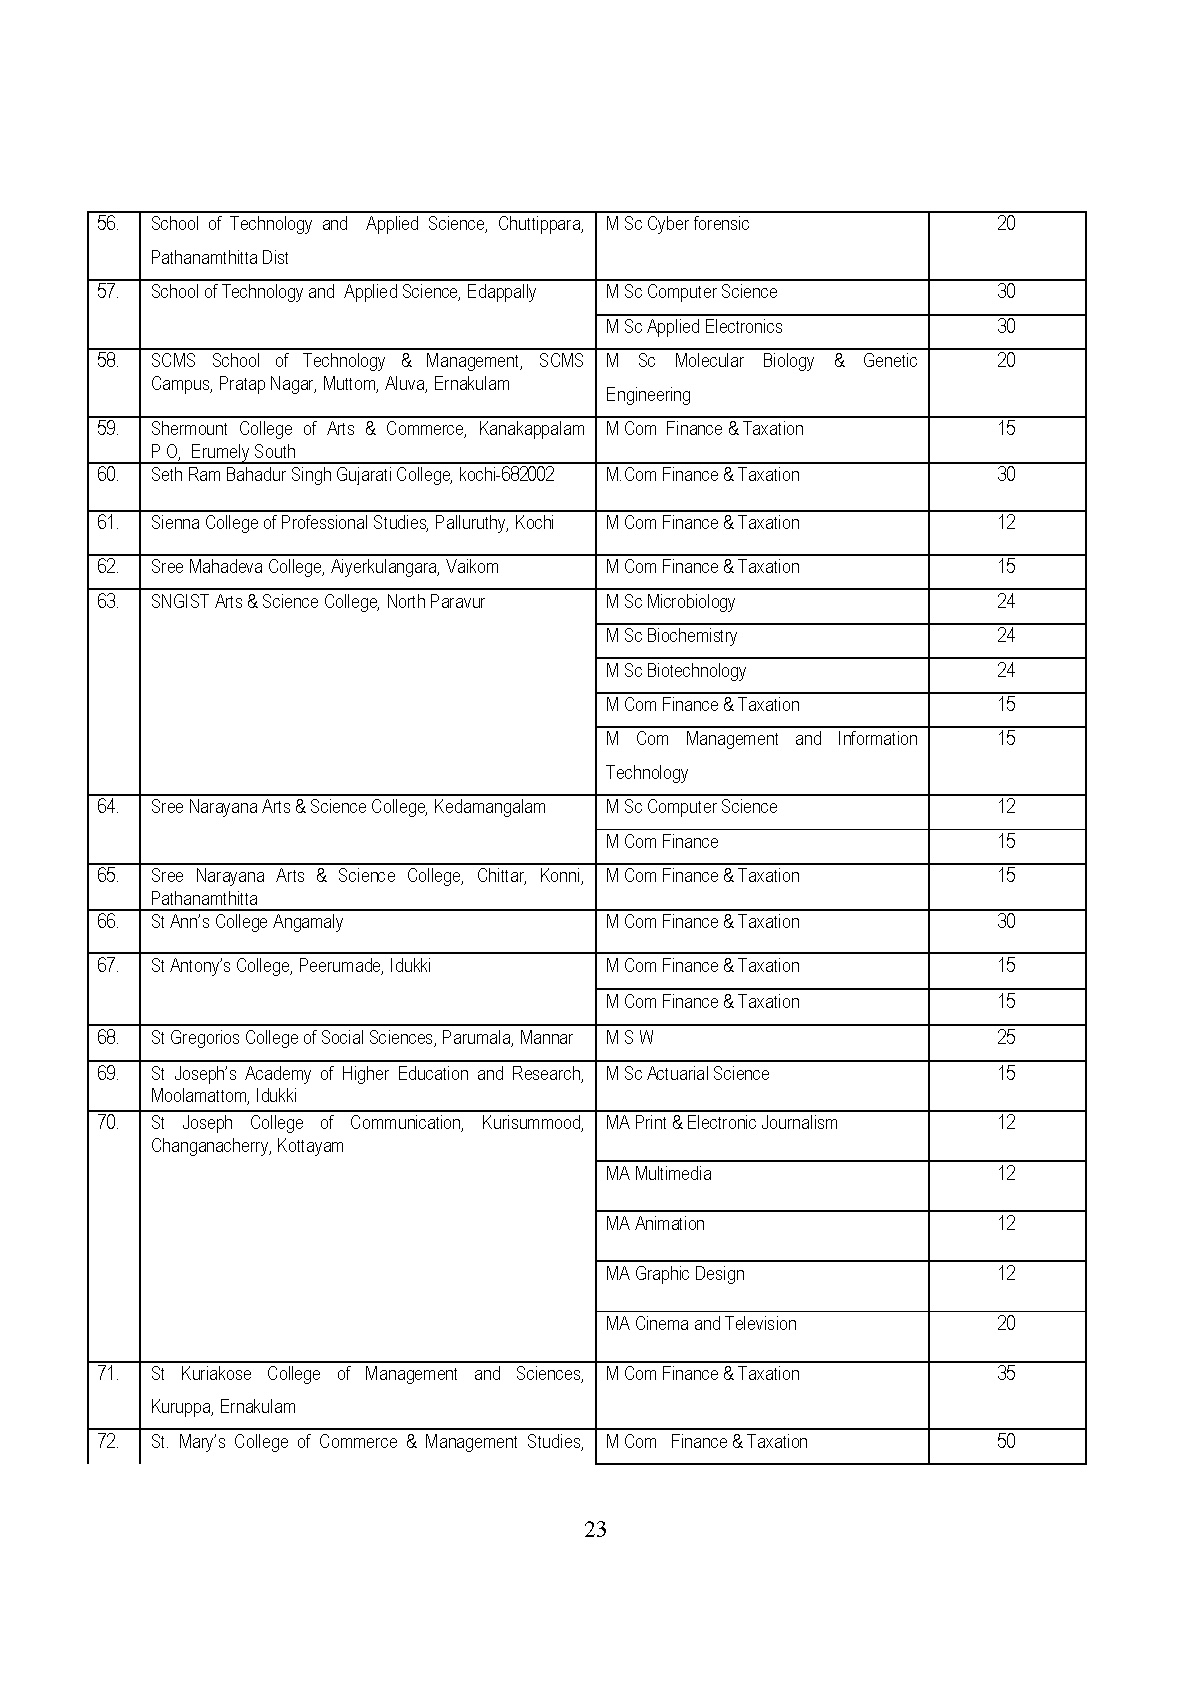 List of Unaided Arts and Science Colleges of MG University 2019 - Notification Image 6